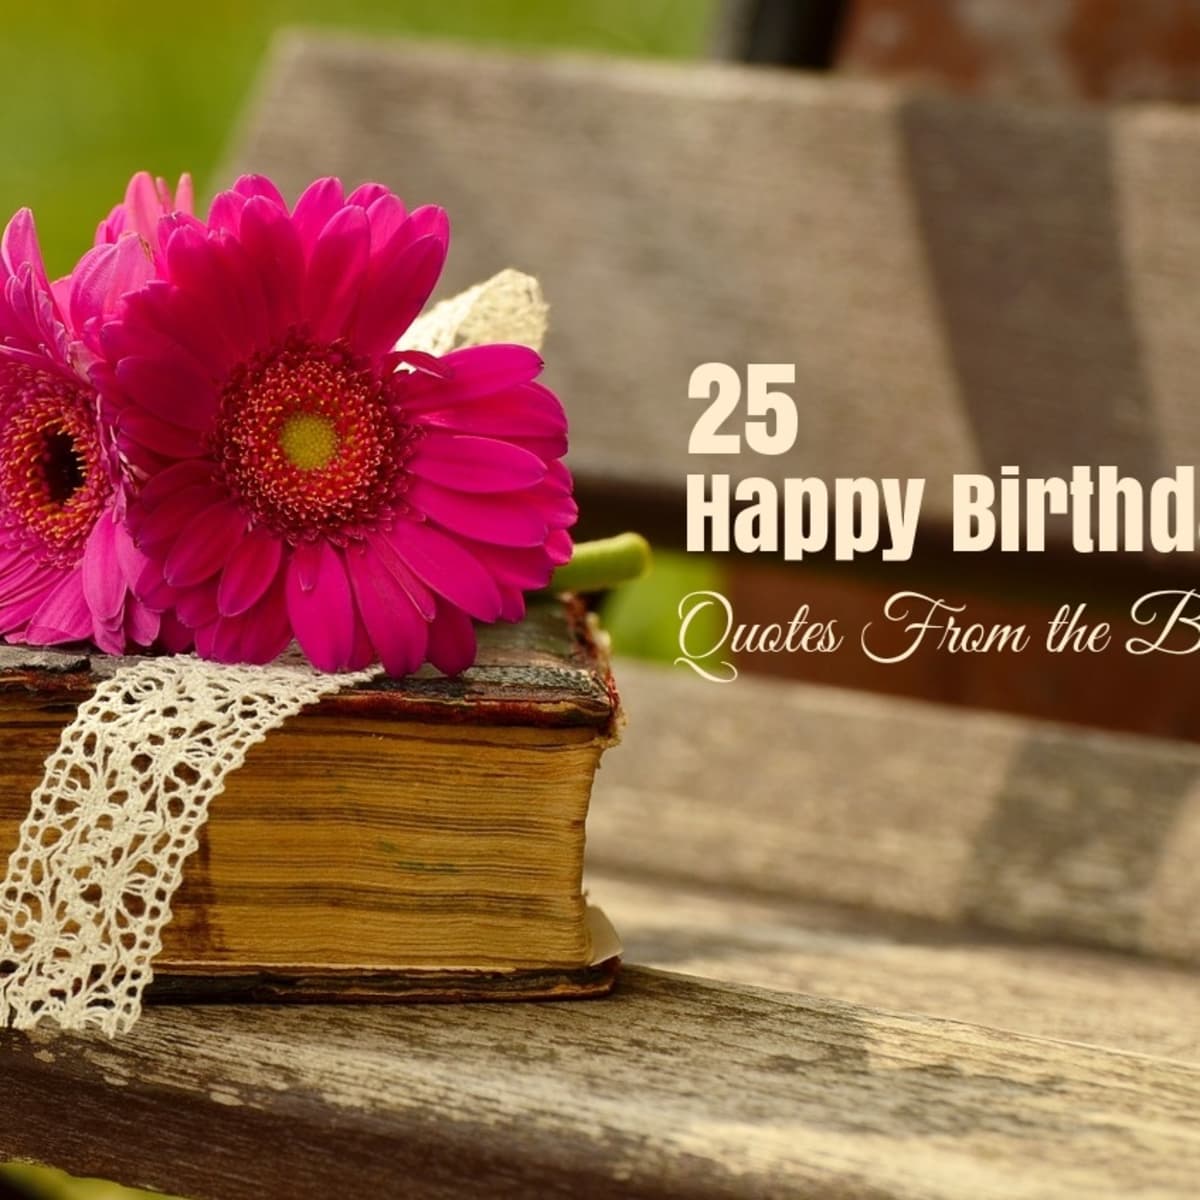 25 Happy Birthday Quotes from the Bible - LetterPile